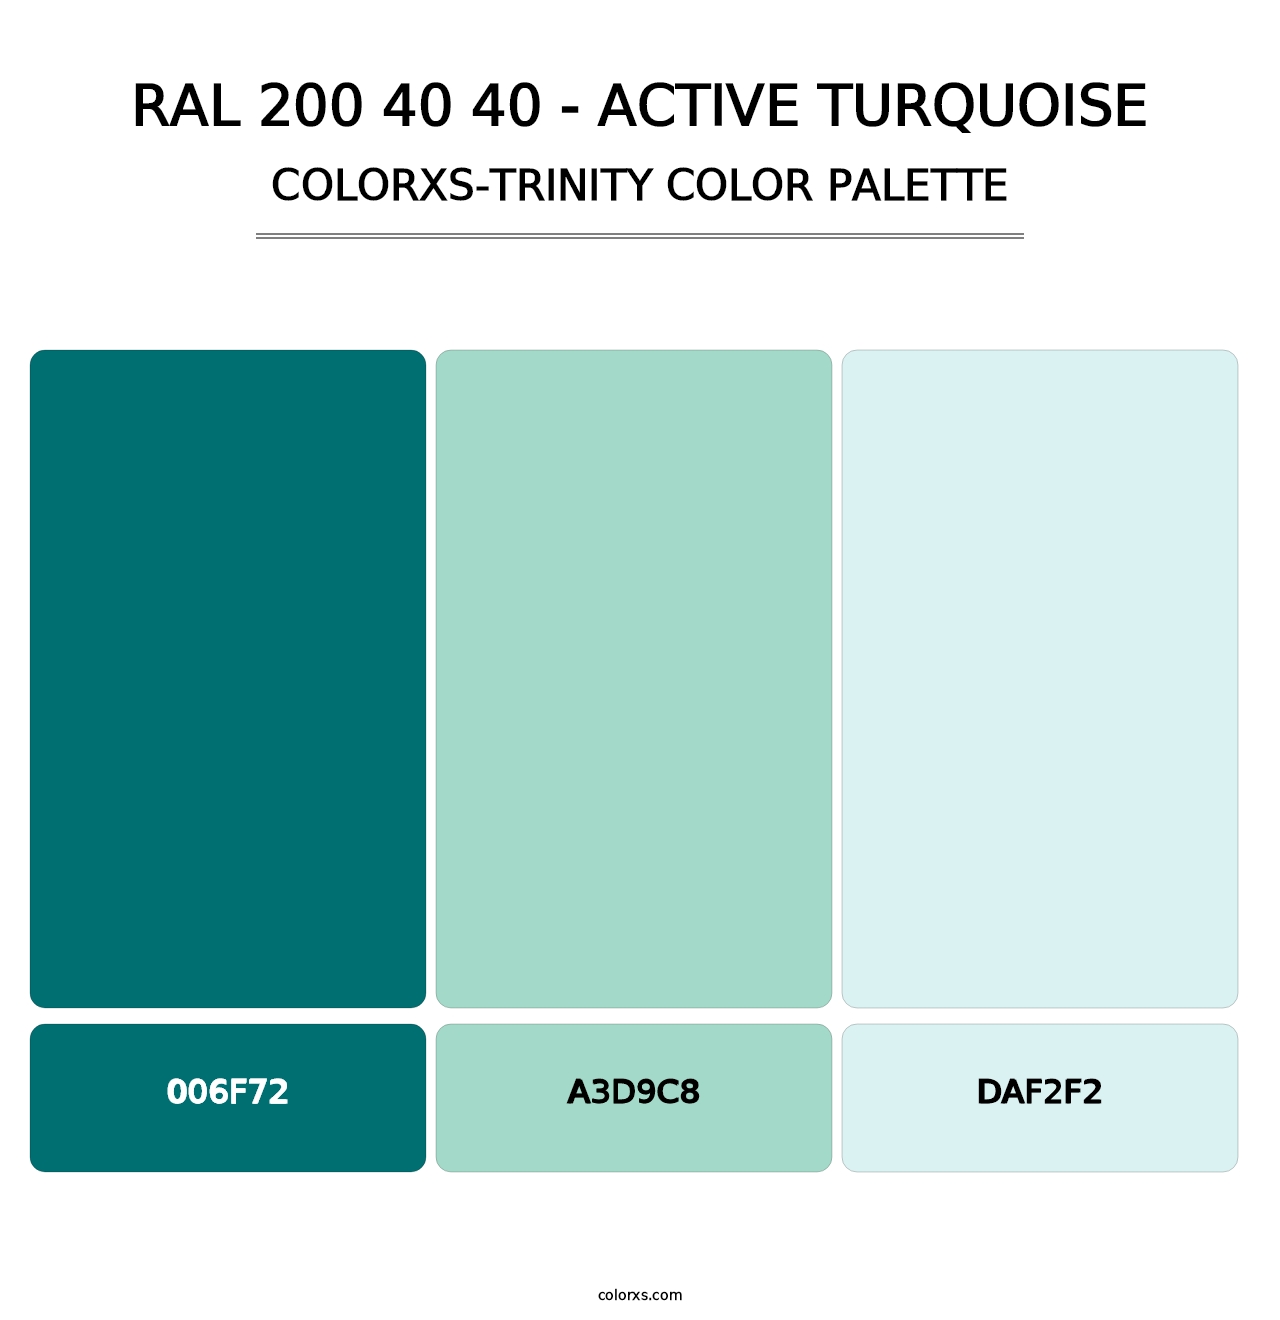 RAL 200 40 40 - Active Turquoise - Colorxs Trinity Palette